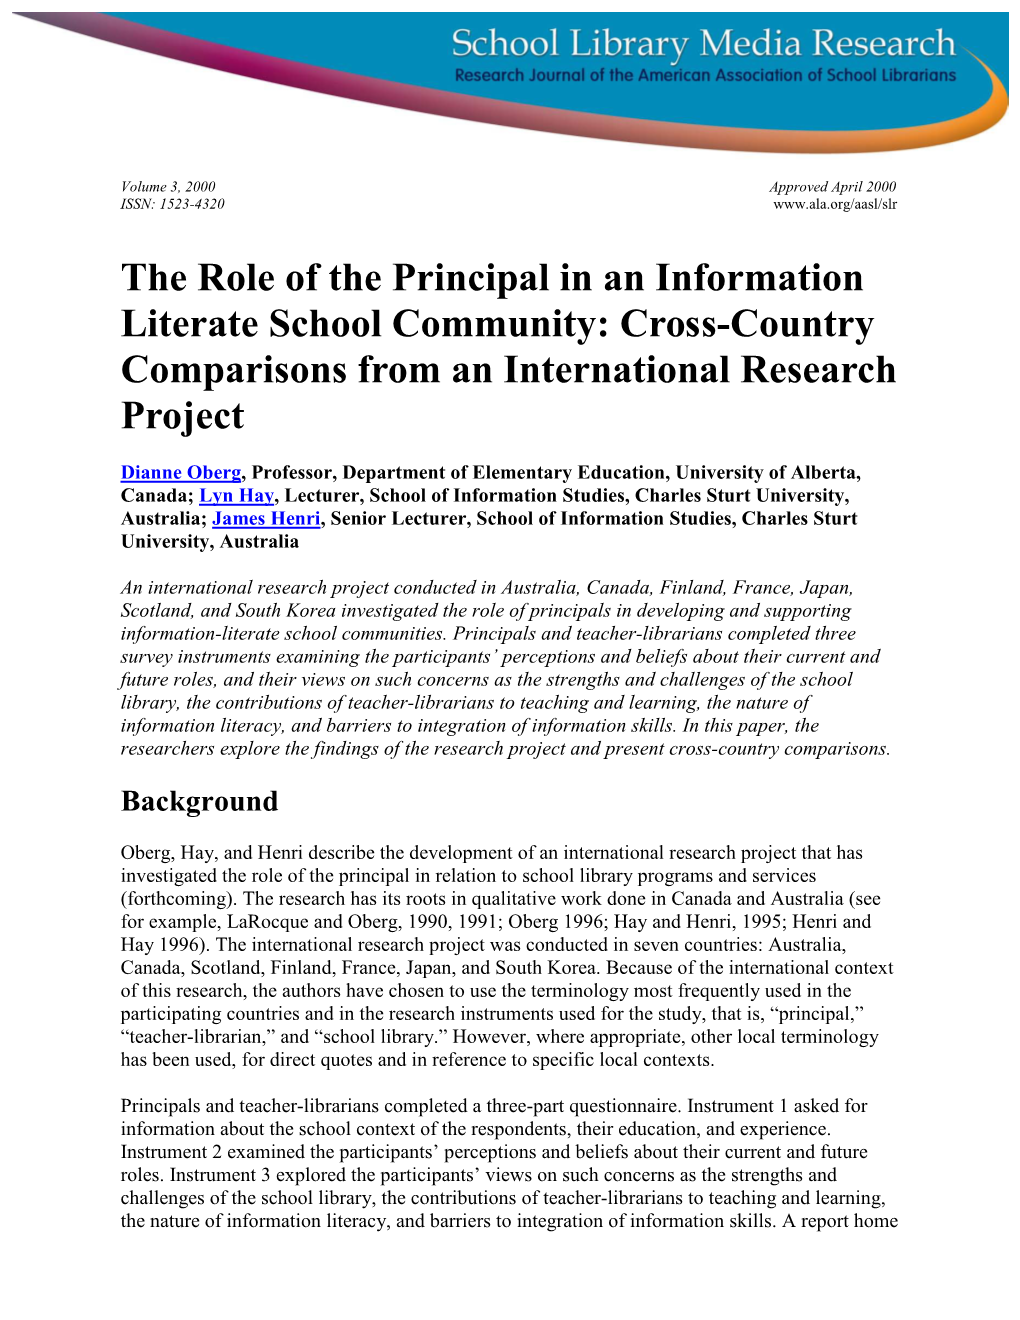 The Role of the Principal in an Information Literate School Community: Cross-Country Comparisons from an International Research Project